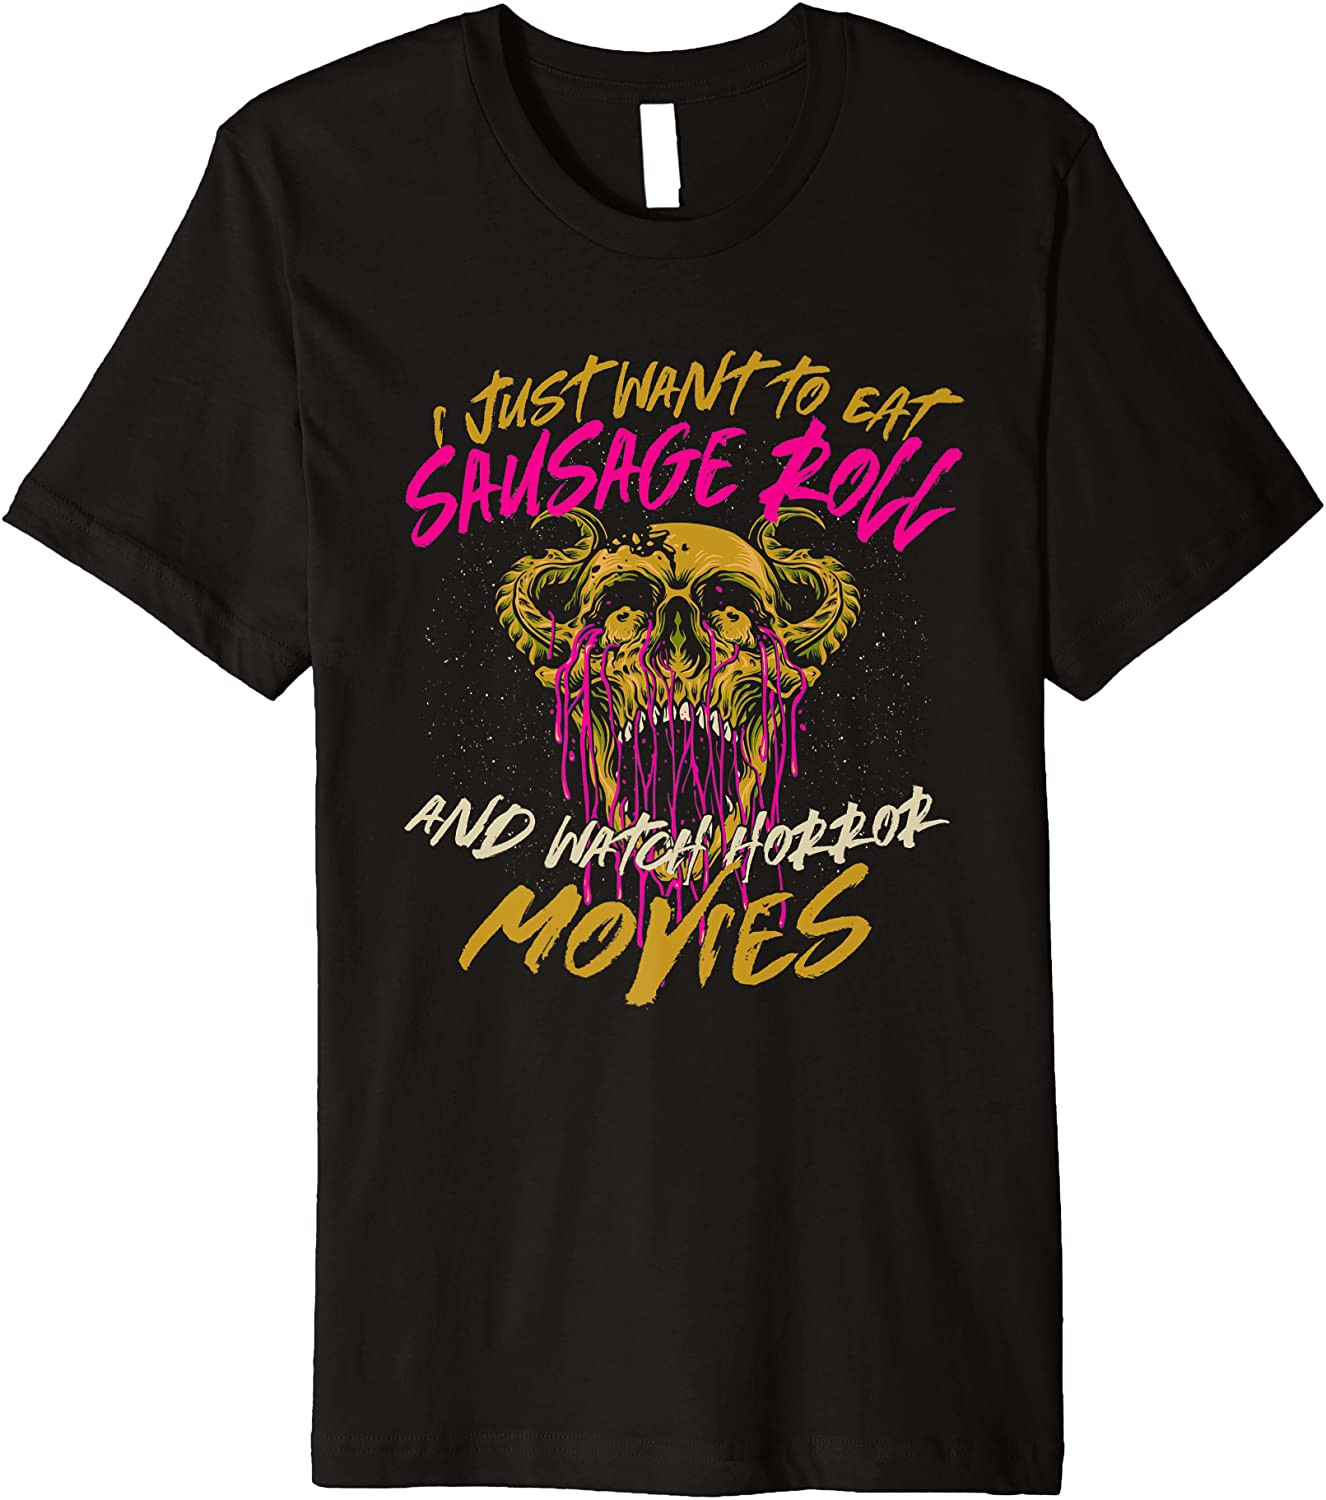 Eat Sausage Roll And Watch Horror Movies Comfort Food T-Shirt